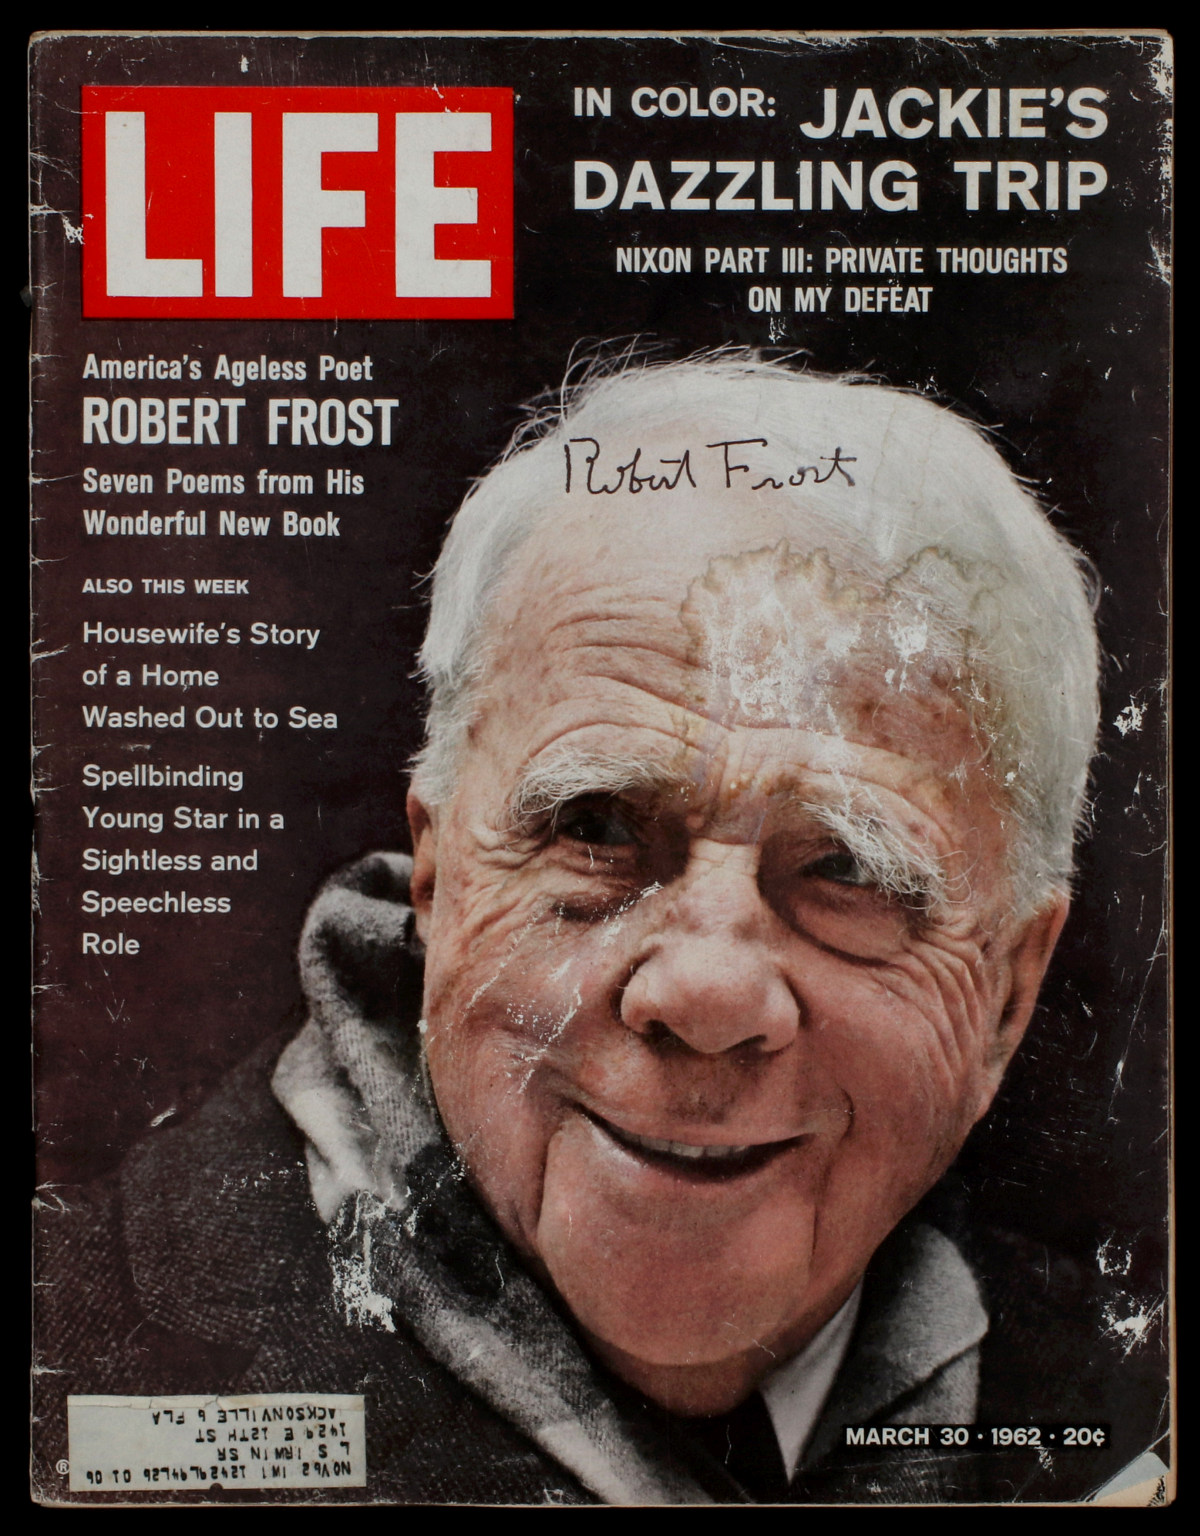 A 1962 ROBERT FROST SIGNED 'LIFE' MAGAZINE